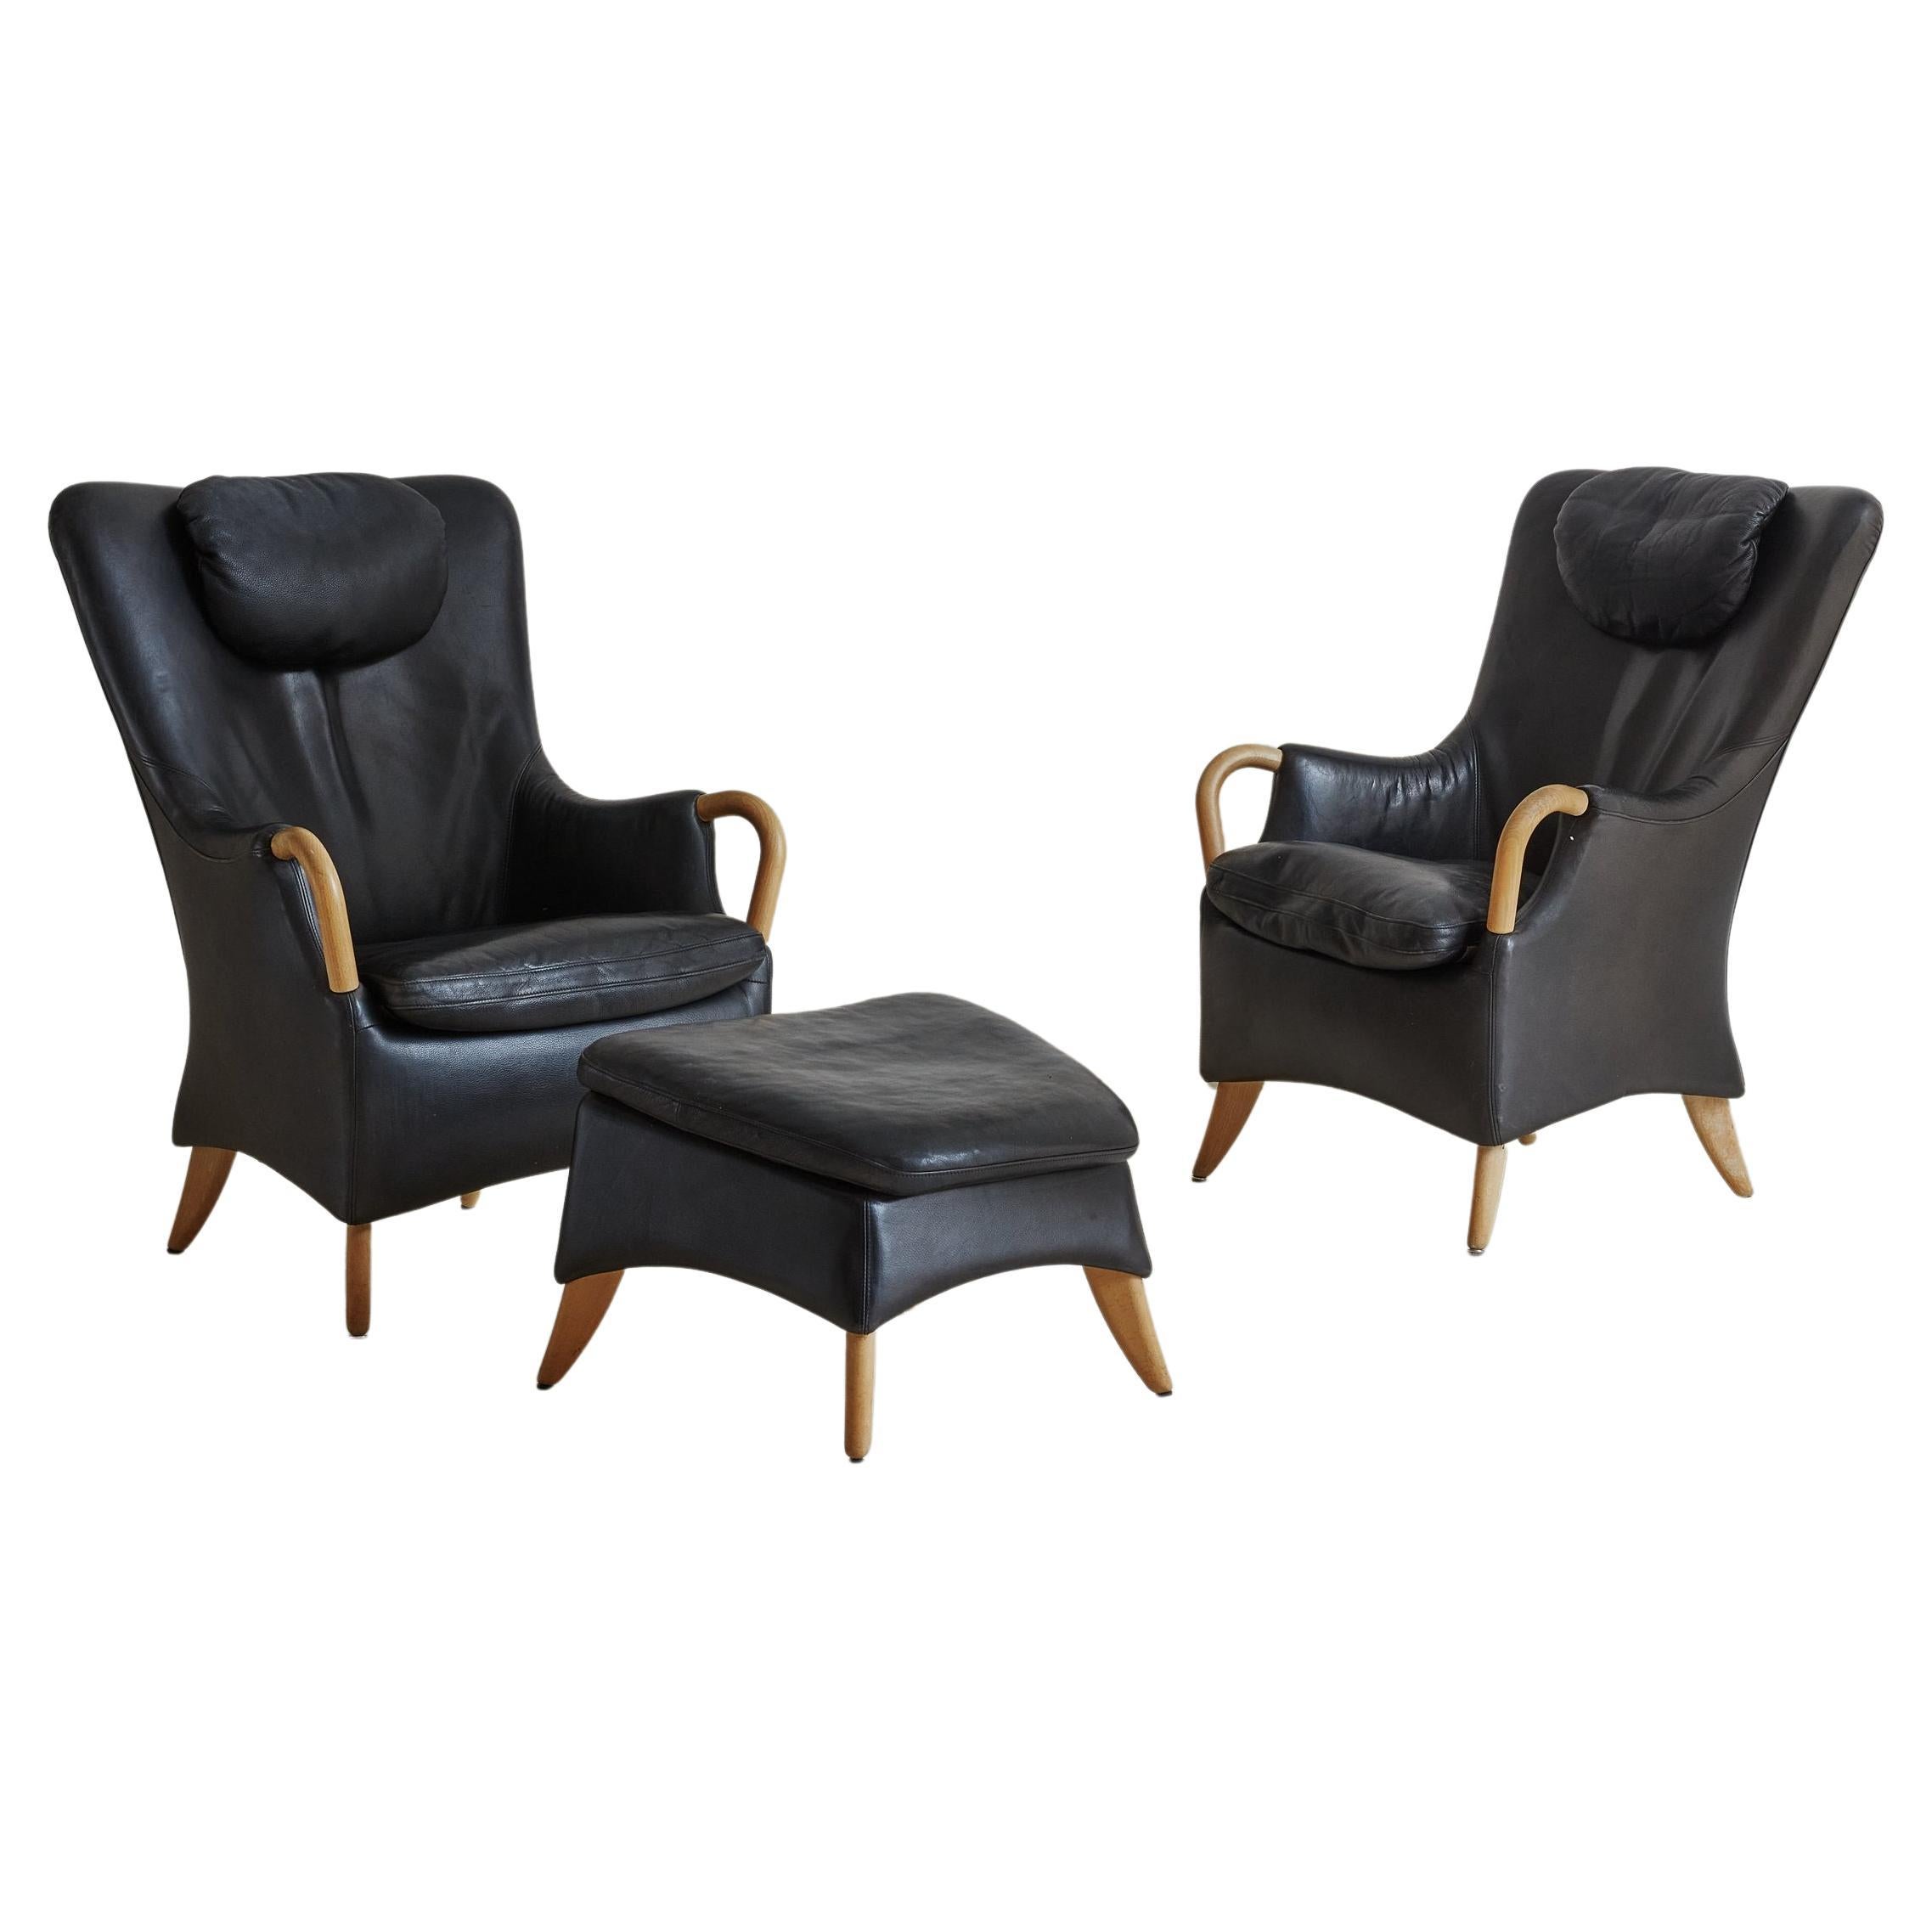 Pair of Black Leather Armchairs with Footstool by Both Søren Nissen & Ebbe Gehl For Sale